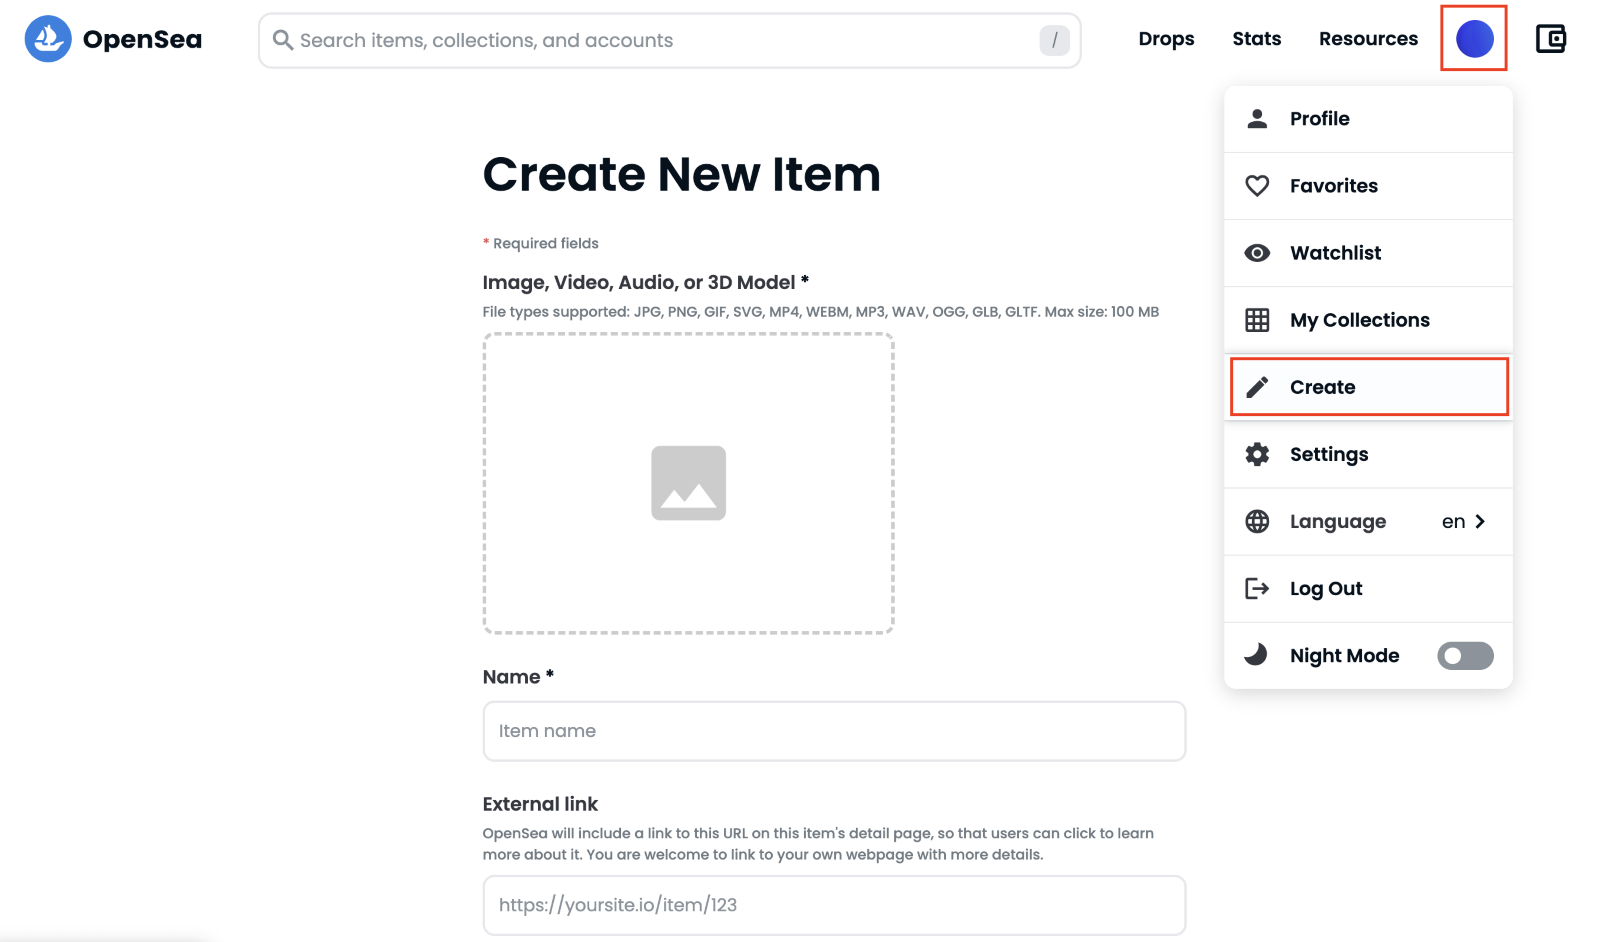 Click "Create" to Create Your Item and Fill in the Suitable Information 